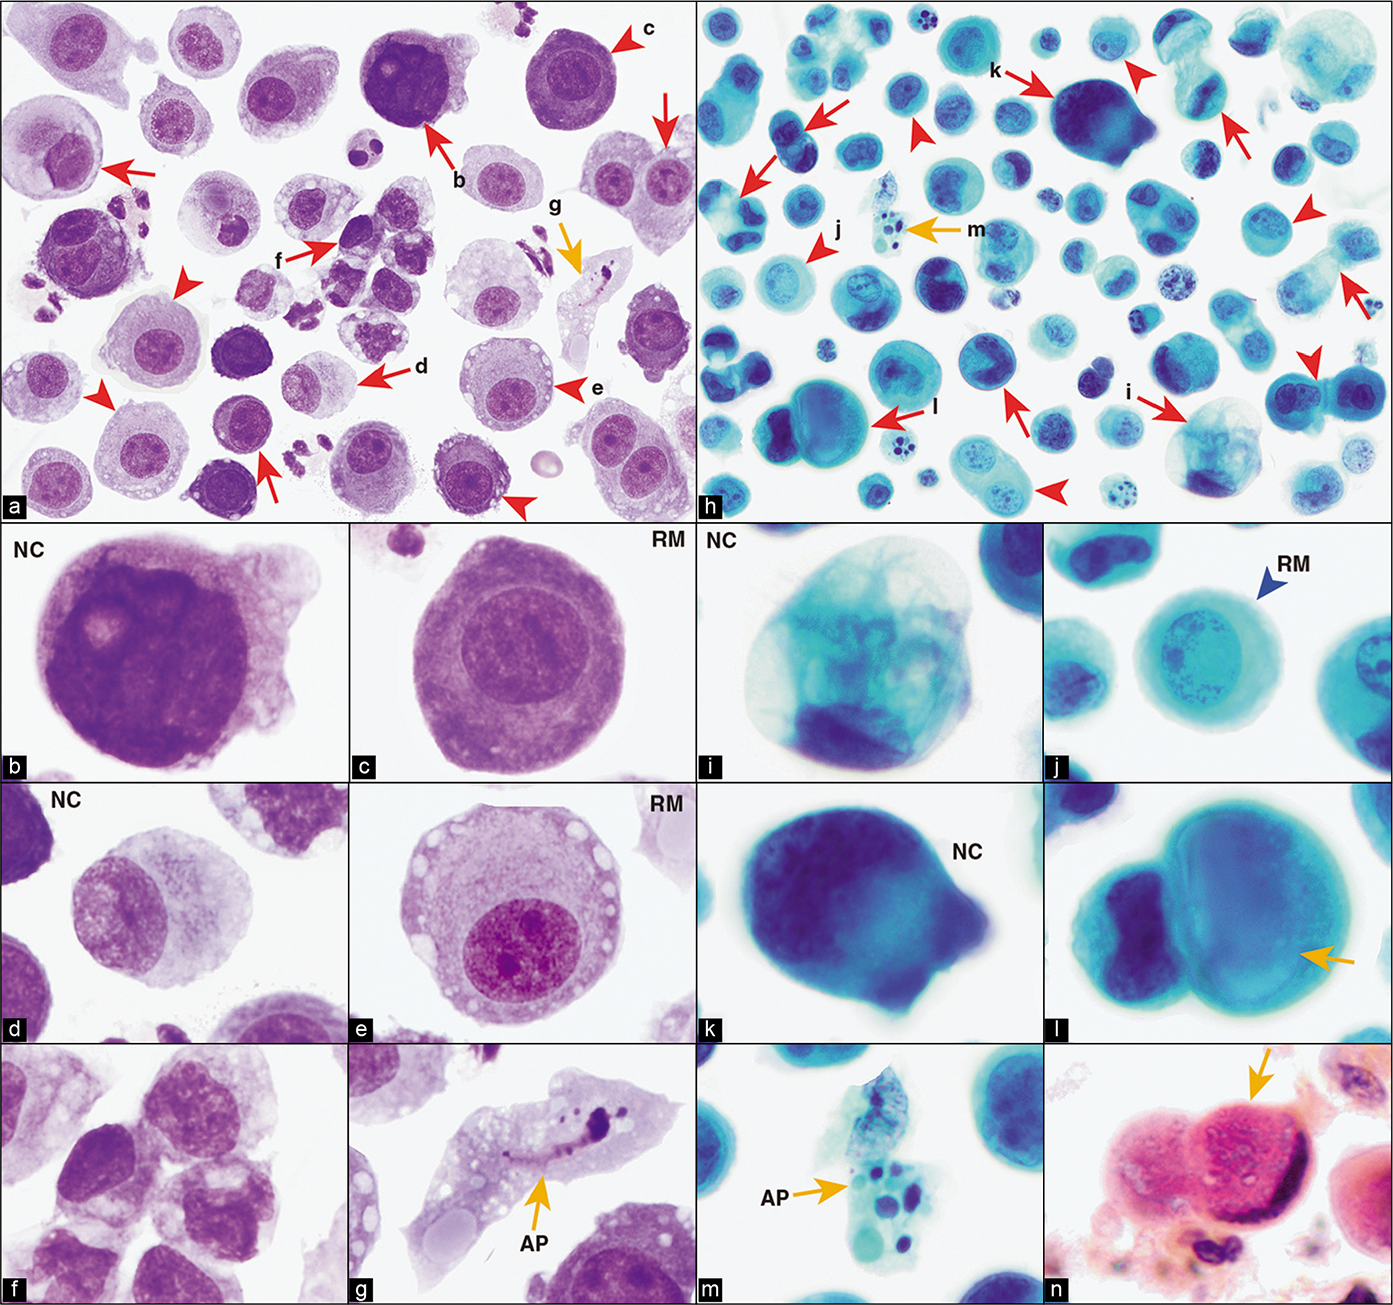 Metastatic cholangiocarcinoma, peritoneal fluid. Cancer cells (red arrows in a,h) are present mostly as solitary cells with eccentric nuclei touching the periphery of the cells (b,d,i,k,l) with occasional loosely cohesive groups of cancer cells (a,f) and reactive mesothelial cells (c,e,j and arrowheads in a,h). A few cells show cytoplasmic vacuoles (i) with secretion (yellow arrow in l), which is positive for mucicarmine in cell-block sections (n). Some apoptotic cancer cells (yellow arrow AP) are also present (g,m). The morphologic features overlap those of other mucinous adenocarcinomas. The patient had cholangiocarcinoma with a mucinous pattern. AP, apoptotic cancer cell; NC, neoplastic cell; RM, reactive mesothelial cell. [a–g: DQ-stained Cytospin smear; h–m, PAP-stained SurePath preparation; n, mucicarmine-stained cell-block section. (a, 100X; b–g, 100X zoomed; h, 100X; i–m, 100X zoomed; n, 100X zoomed).]